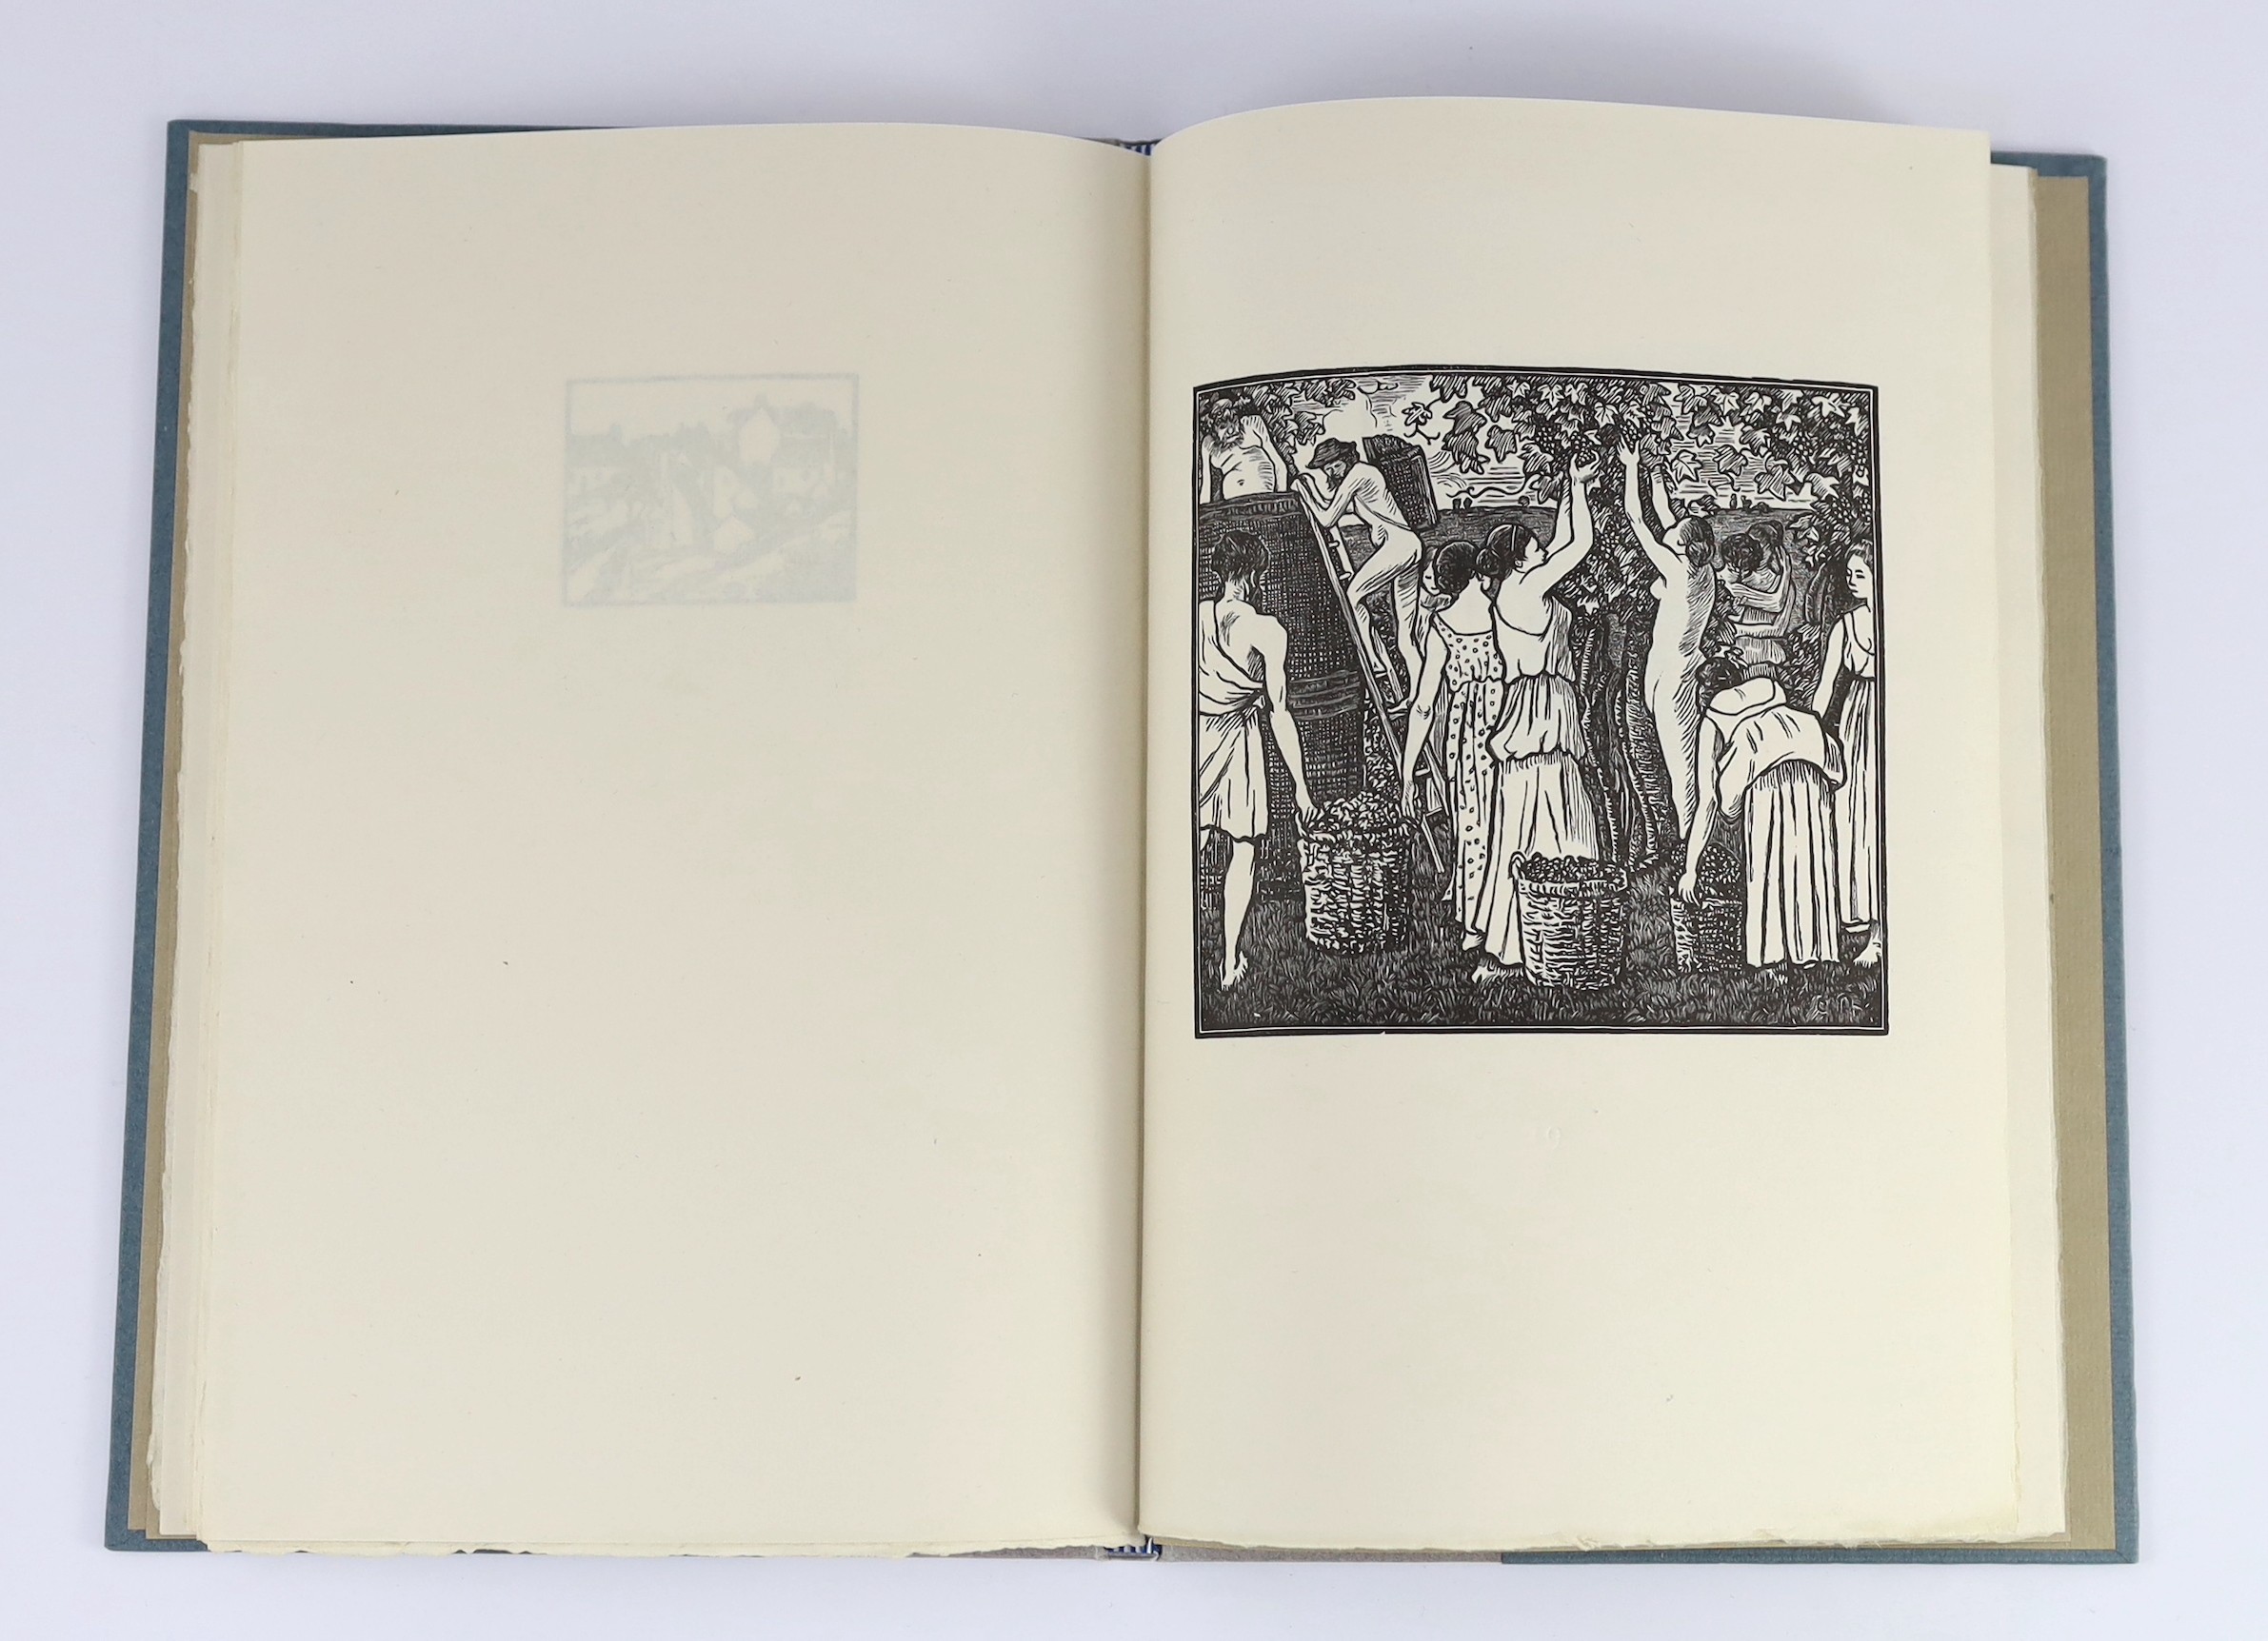 Pissaro, Lucien - Pastorale: wood-engravings ... with a note on the Kelmscott paper by John Bidwell. Limited edition. frontis. & 23 full-page engravings (4 coloured); original 2 tone paper boards, fore and lower edges un